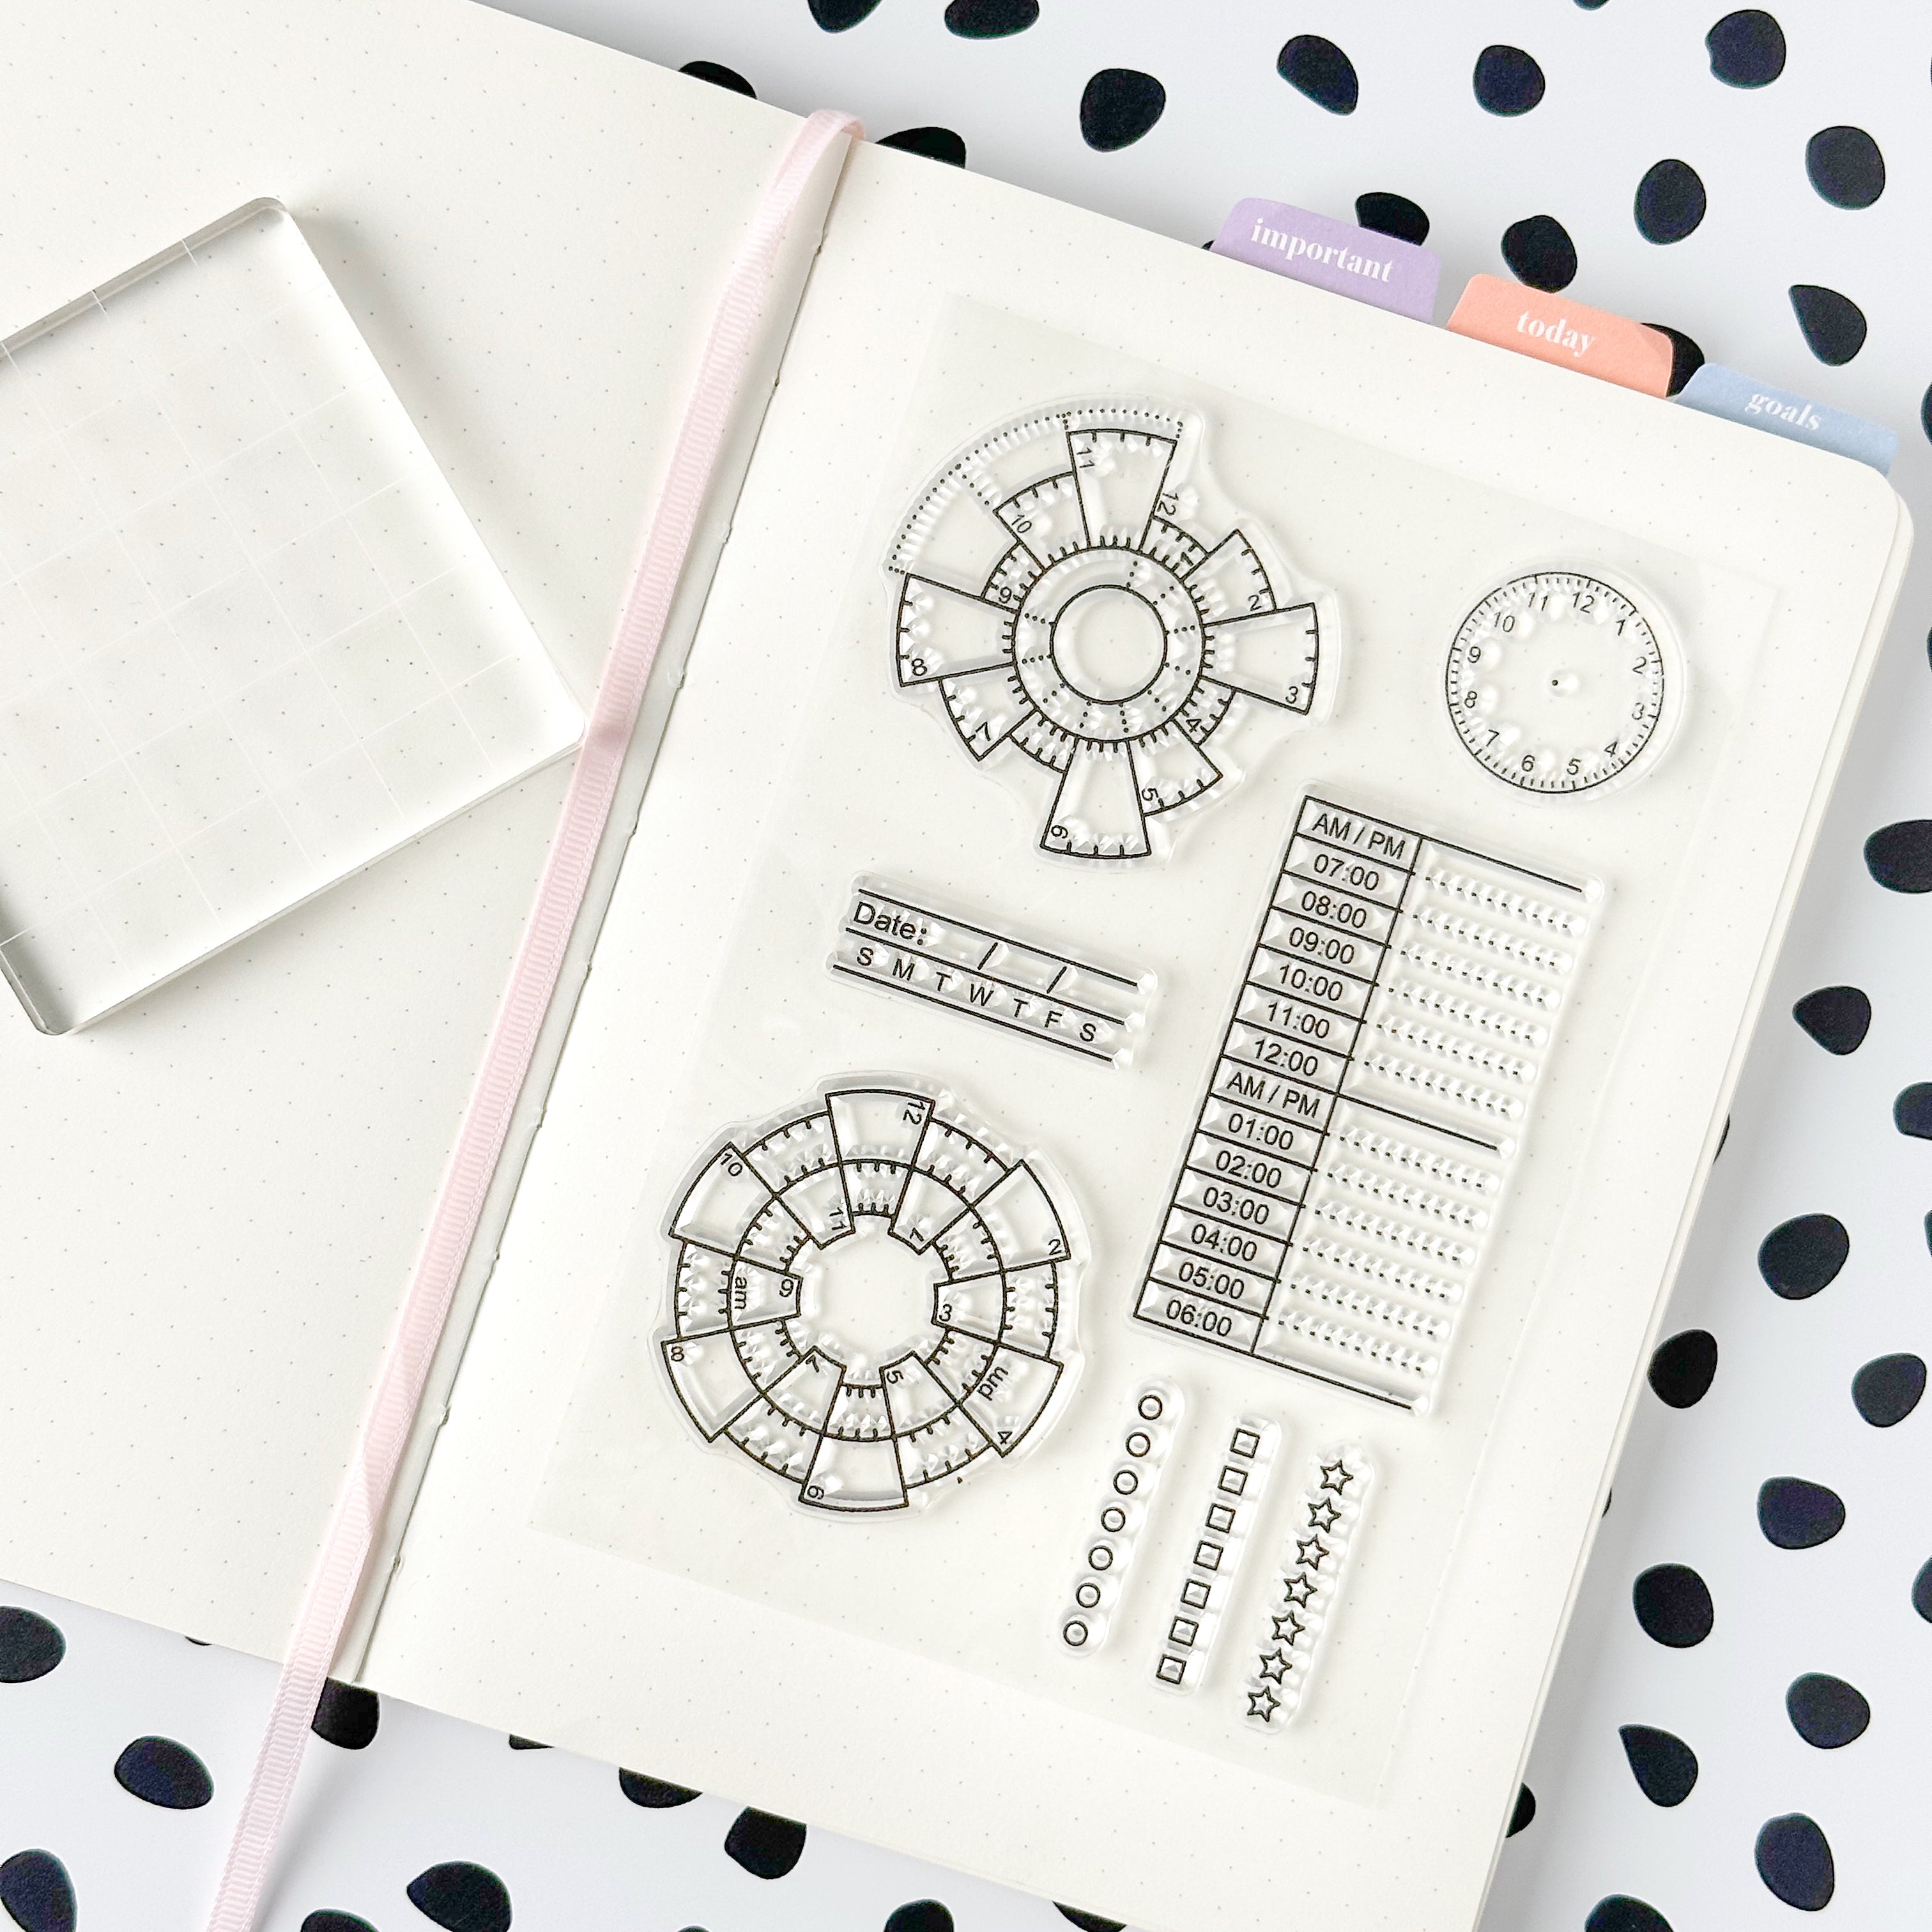 Rubber stamp - Habit tracker circle perfect for planner and journals -  Extraordinary stationery